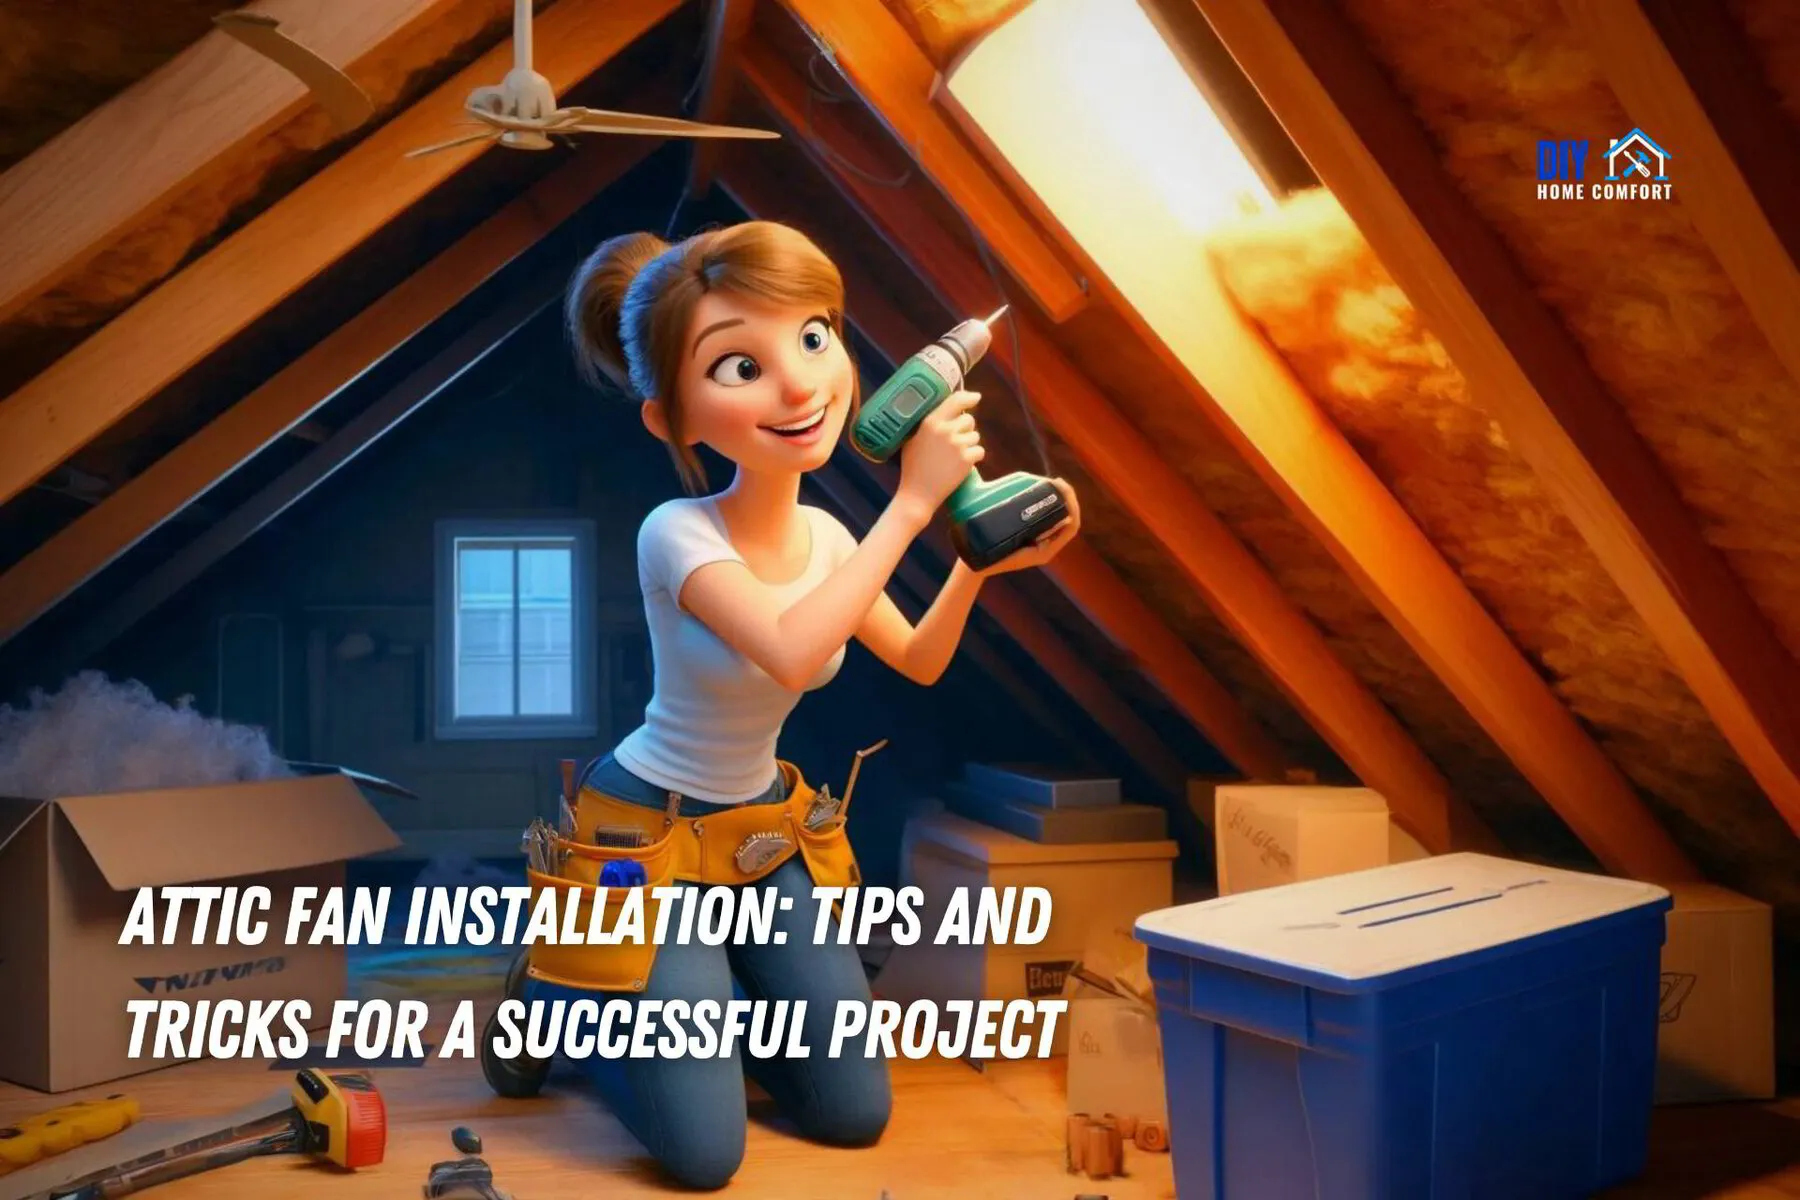 Attic Fan Installation: Tips and Tricks for a Successful Project  | DIY Home Comfort